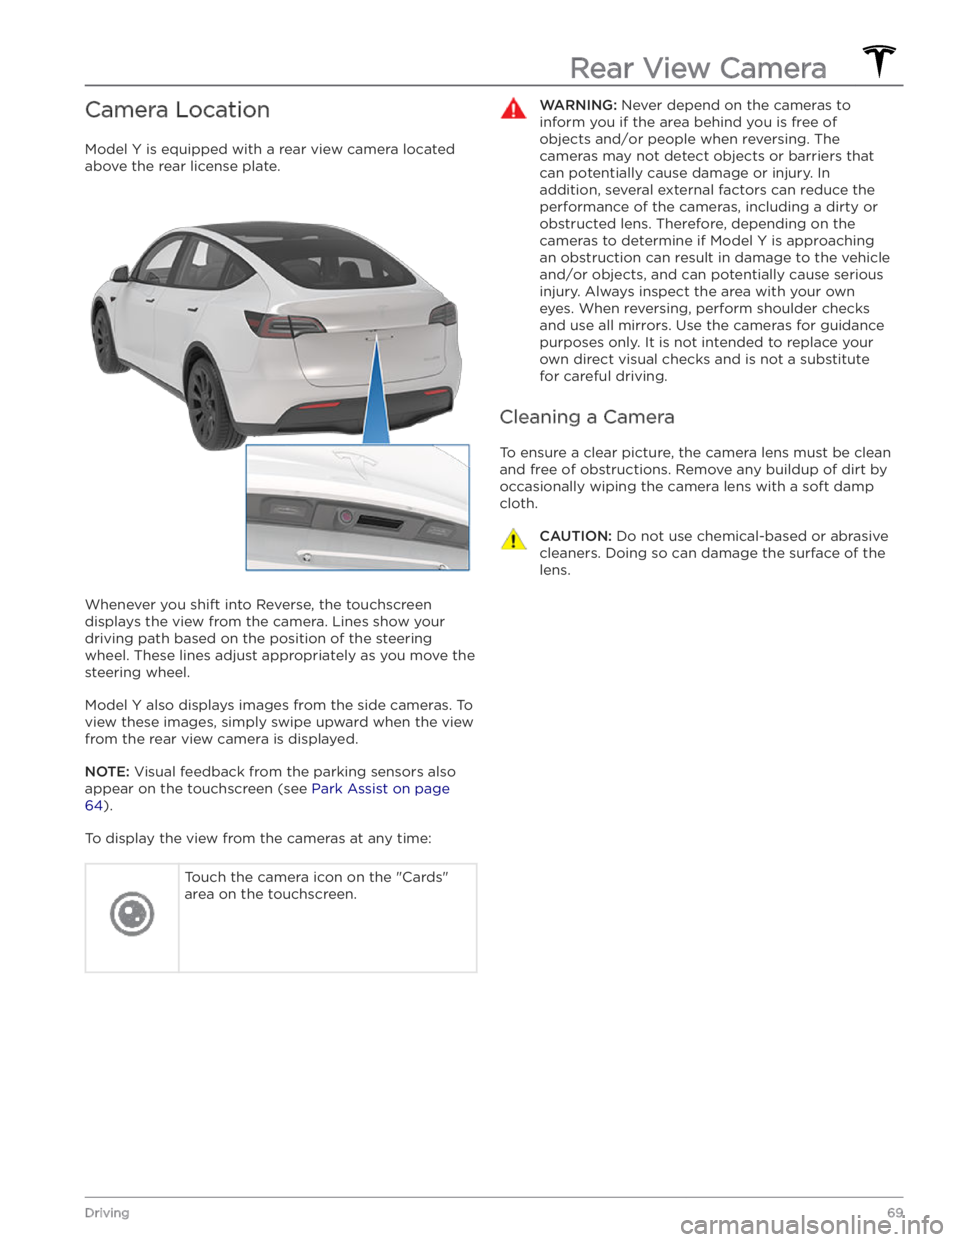 TESLA MODEL Y 2020  Owner´s Manual Camera Location
Model Y is equipped with a rear view camera located 
above the rear license plate.
Whenever you shift into Reverse, the touchscreen  displays the view from the camera. Lines show your 